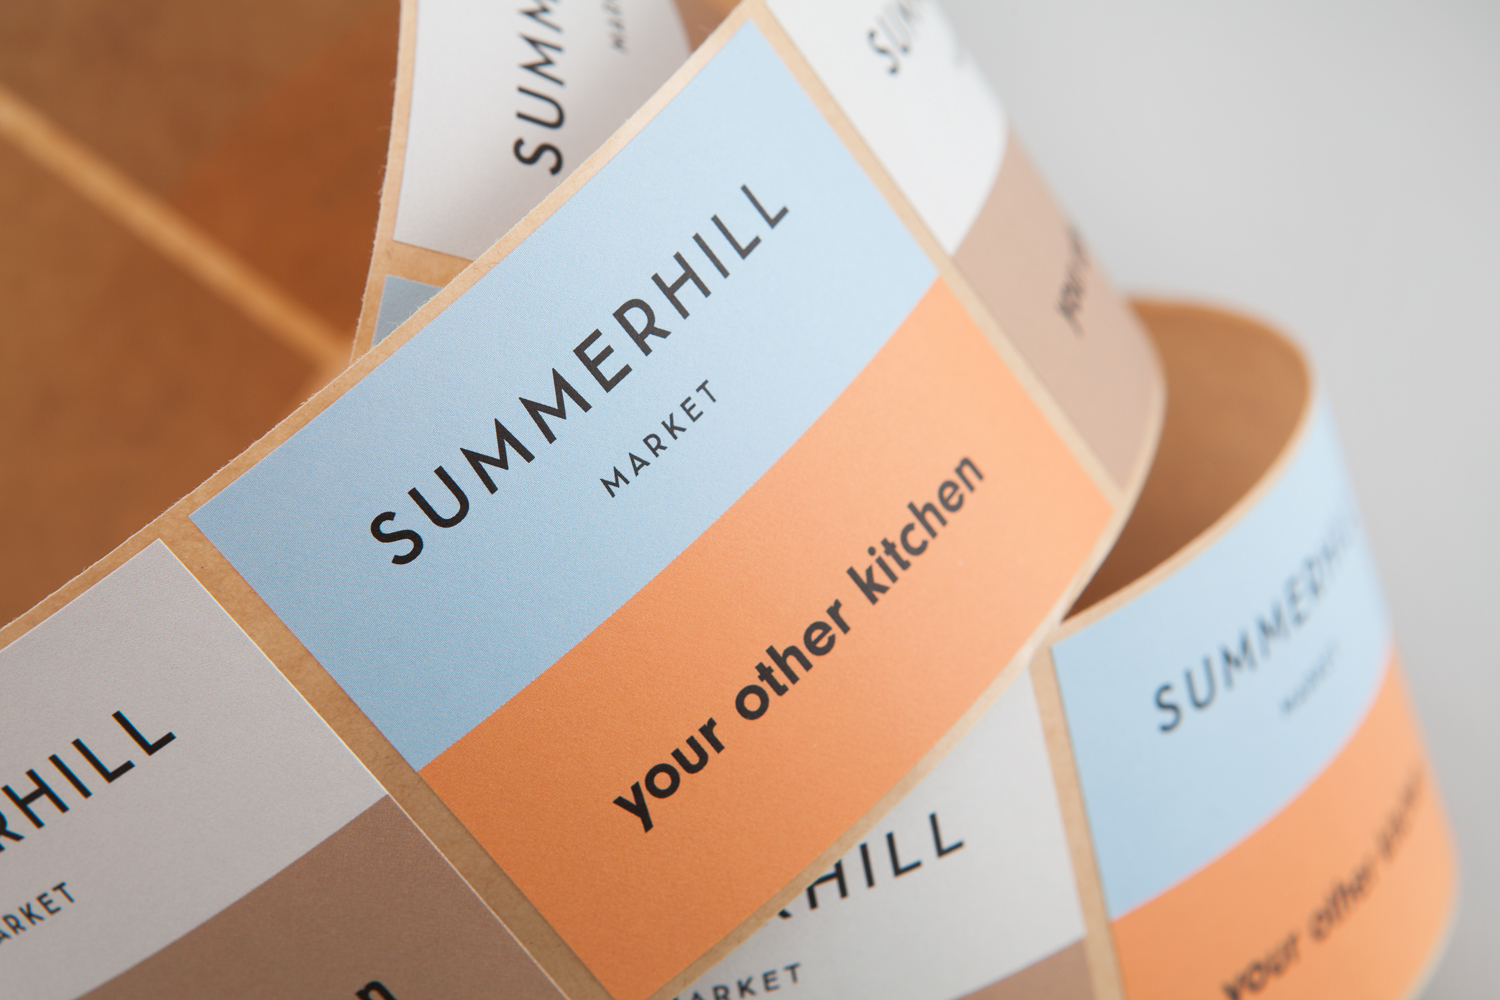 Logotype and stickers designed by Canadian studio Blok for Toronto based boutique grocery store Summerhill Market